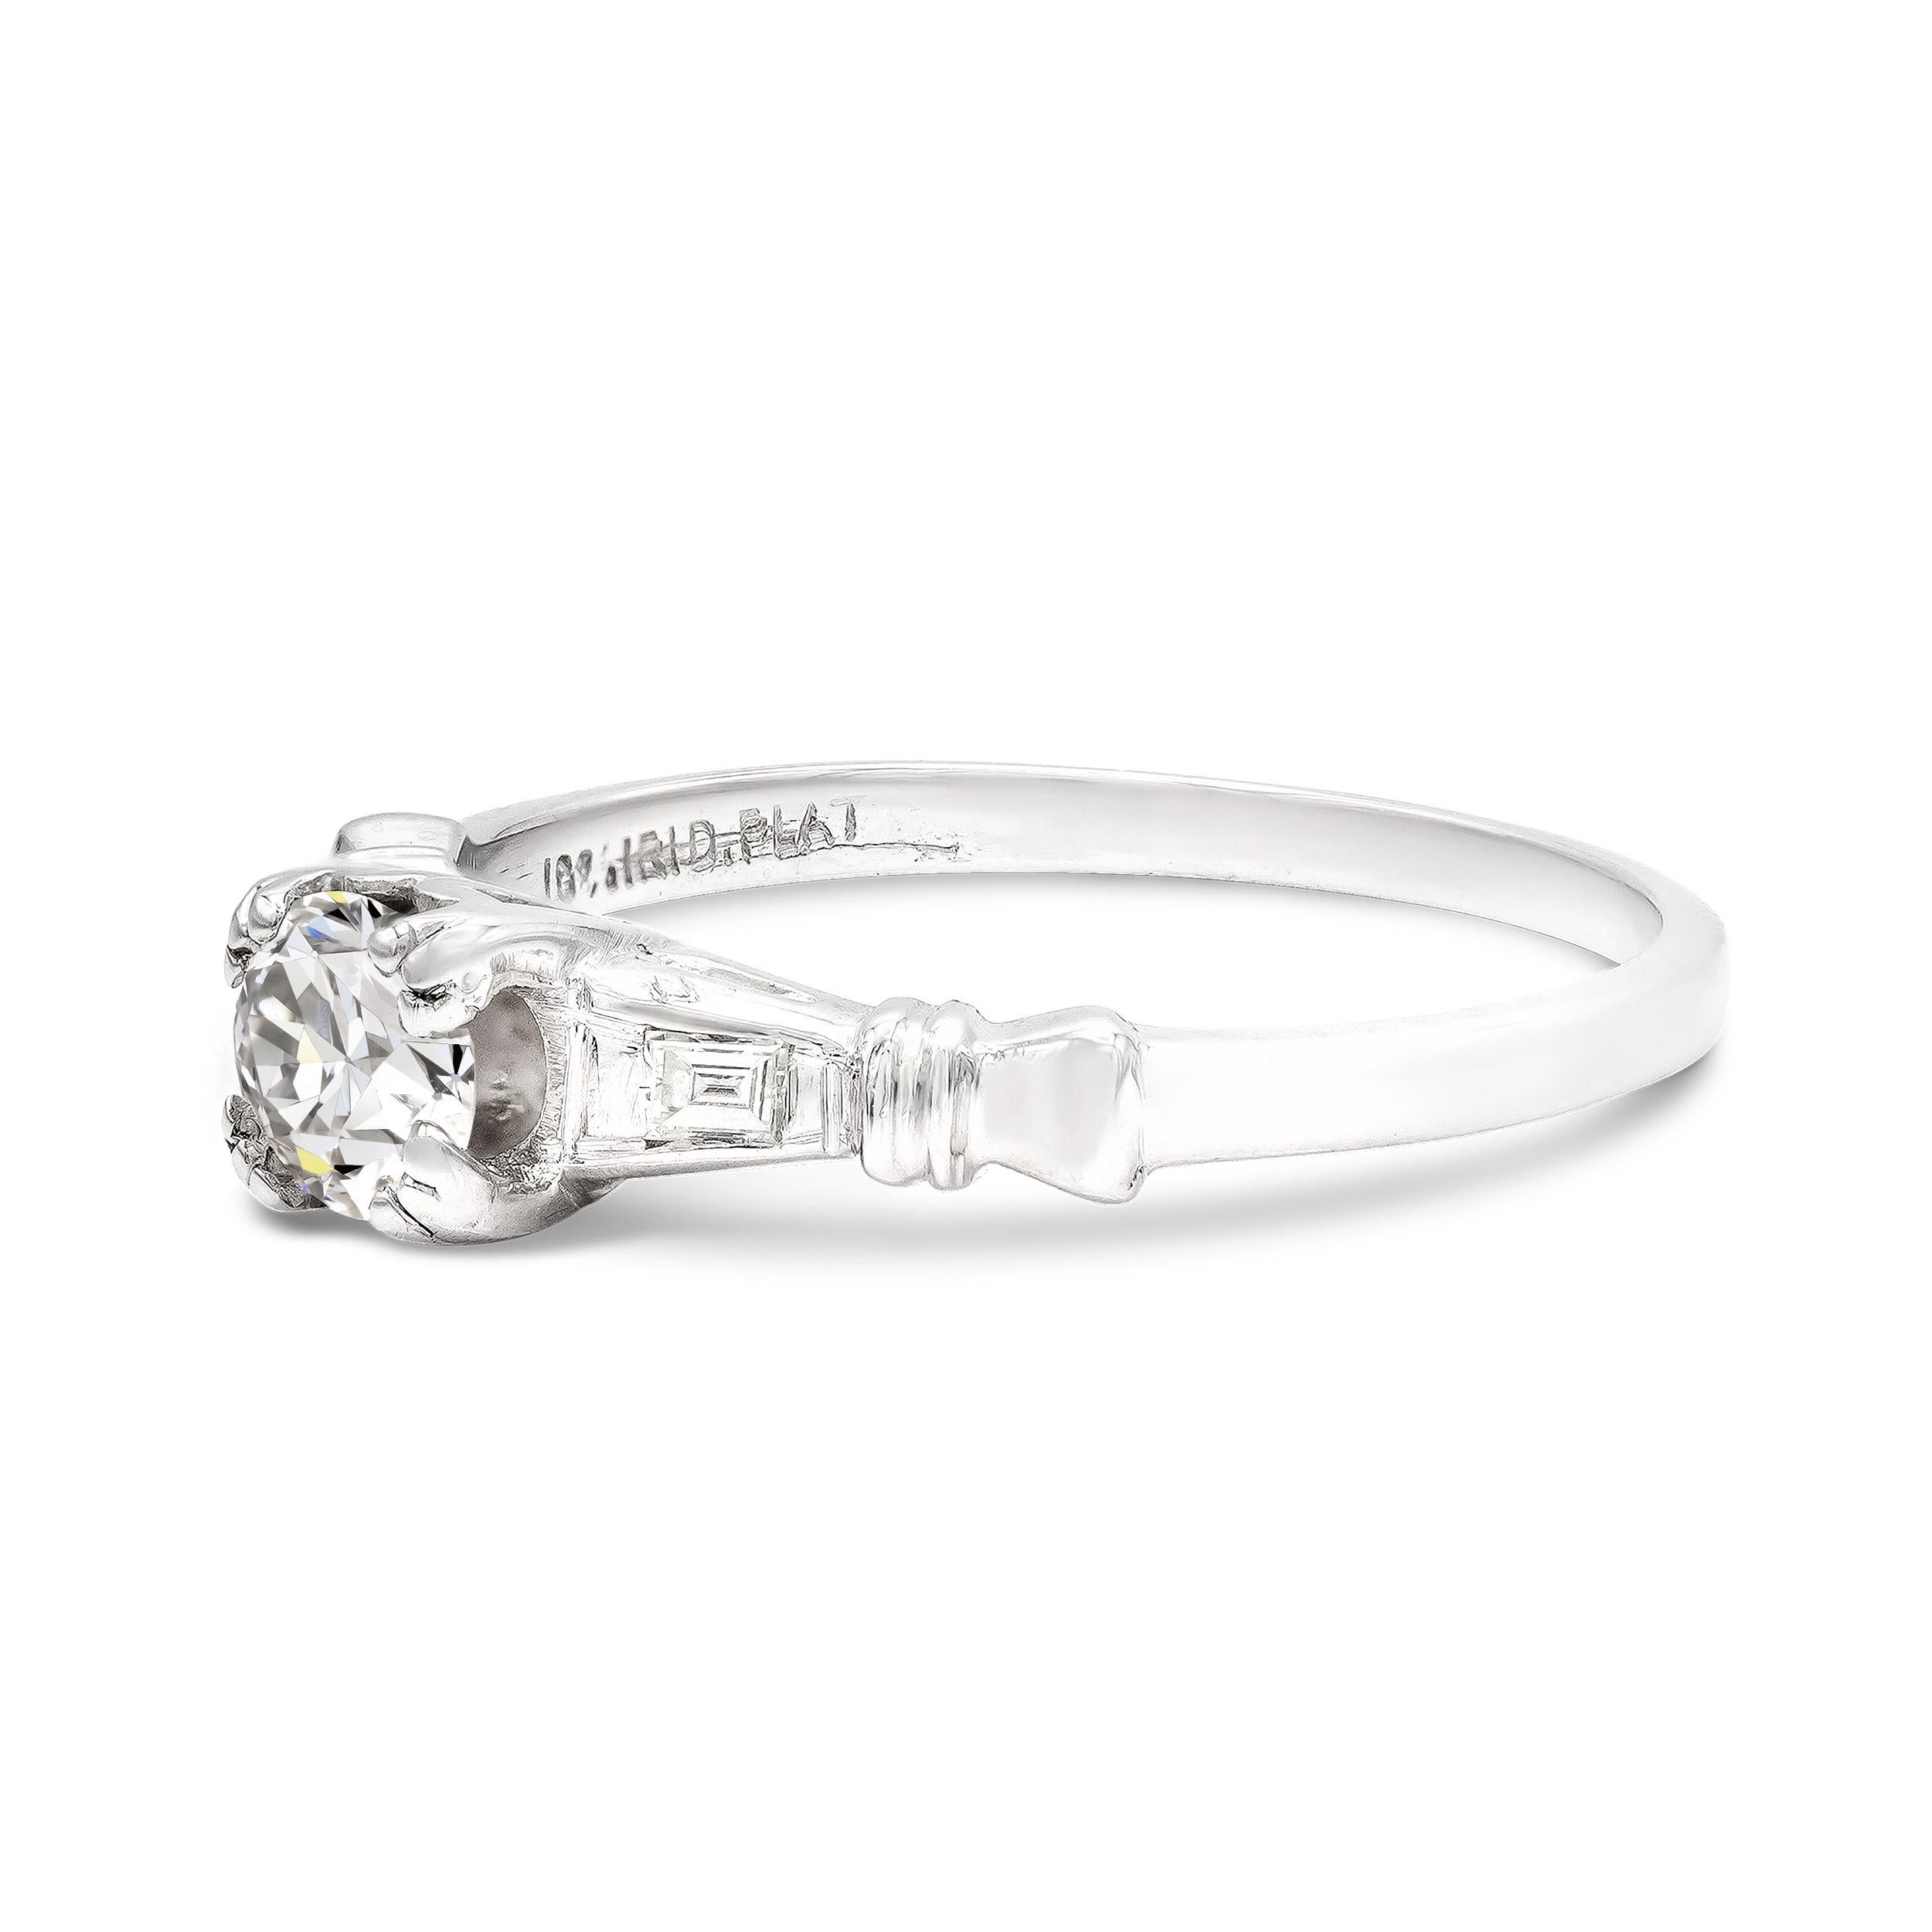 A sweet old European cut diamond is the star of this art deco engagement ring style. Graded F VS2 by GIA, it's icy-white and the perfect complement to this super charming platinum setting. We love the geometric shoulders, accented with two tiny